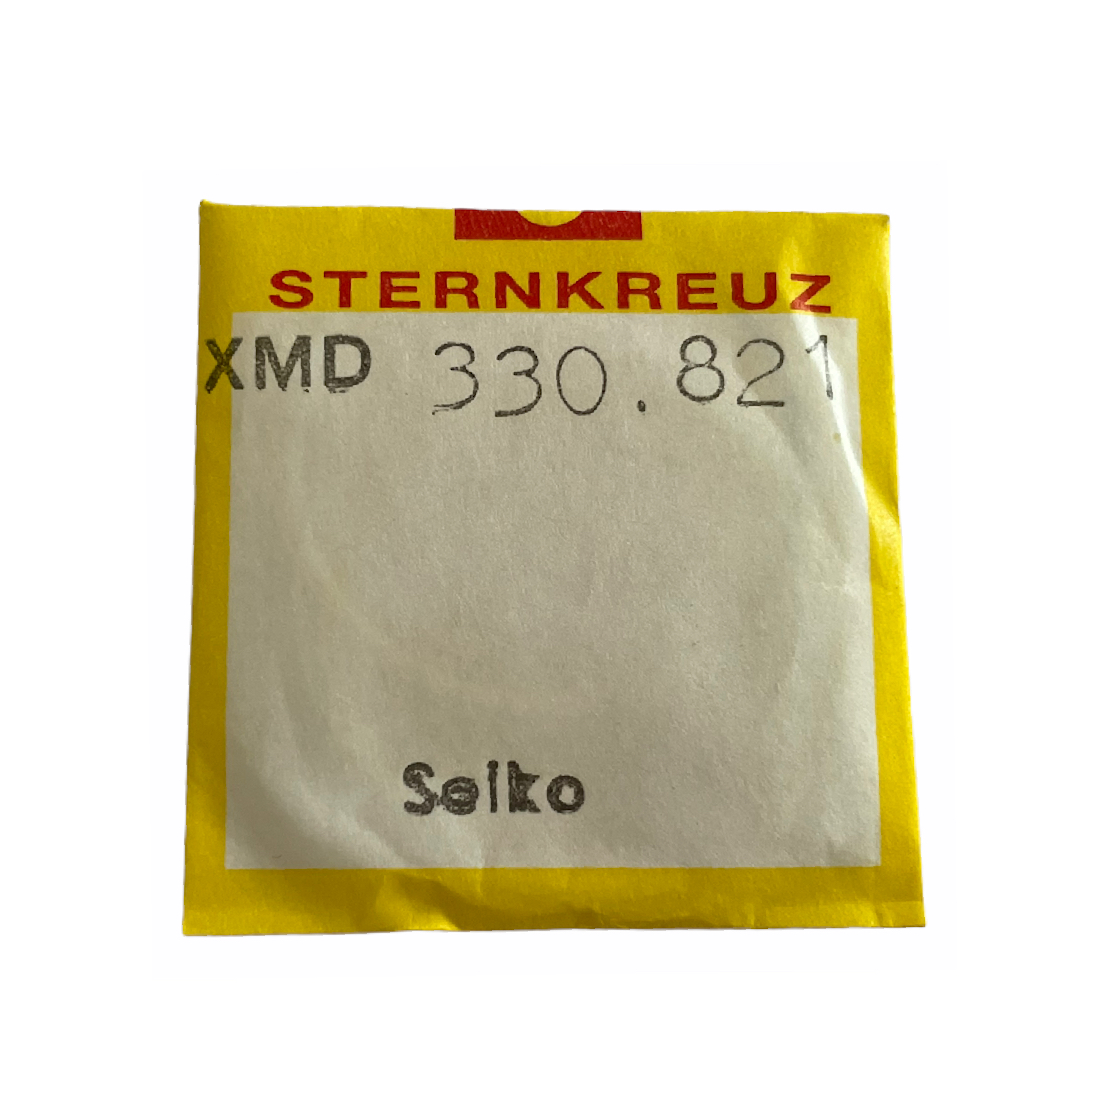 Seiko mineral special domed crystal 6139-6000, 6139-6001, 6139-6002, 6139-6005  - 219492